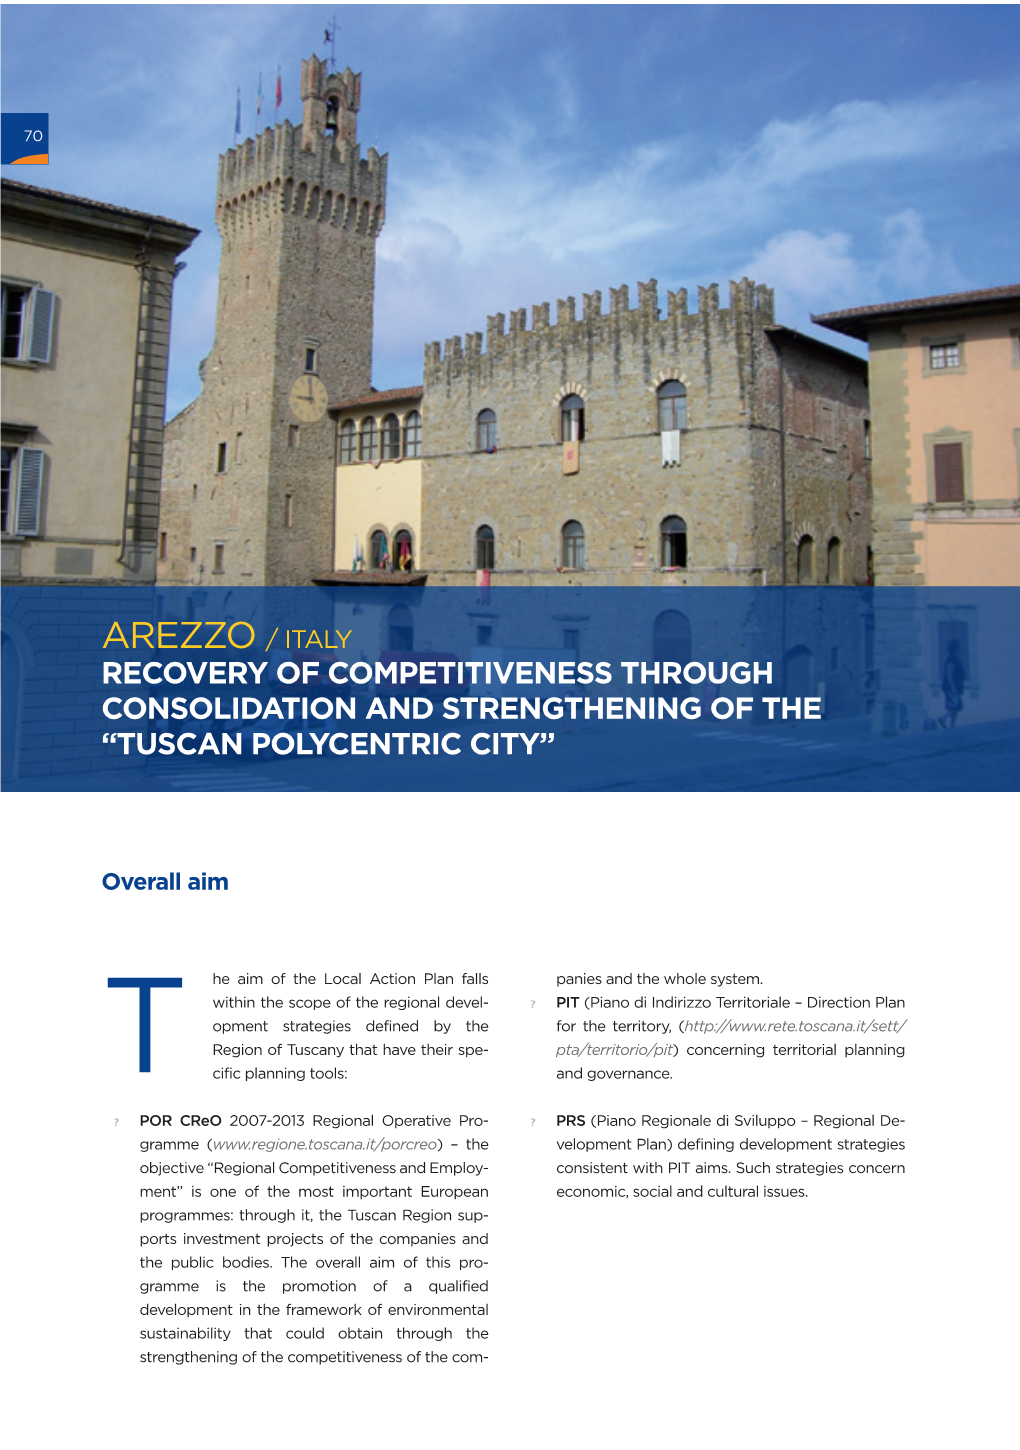 Arezzo / Italy Recovery of Competitiveness Through Consolidation and Strengthening of the “Tuscan Polycentric City”